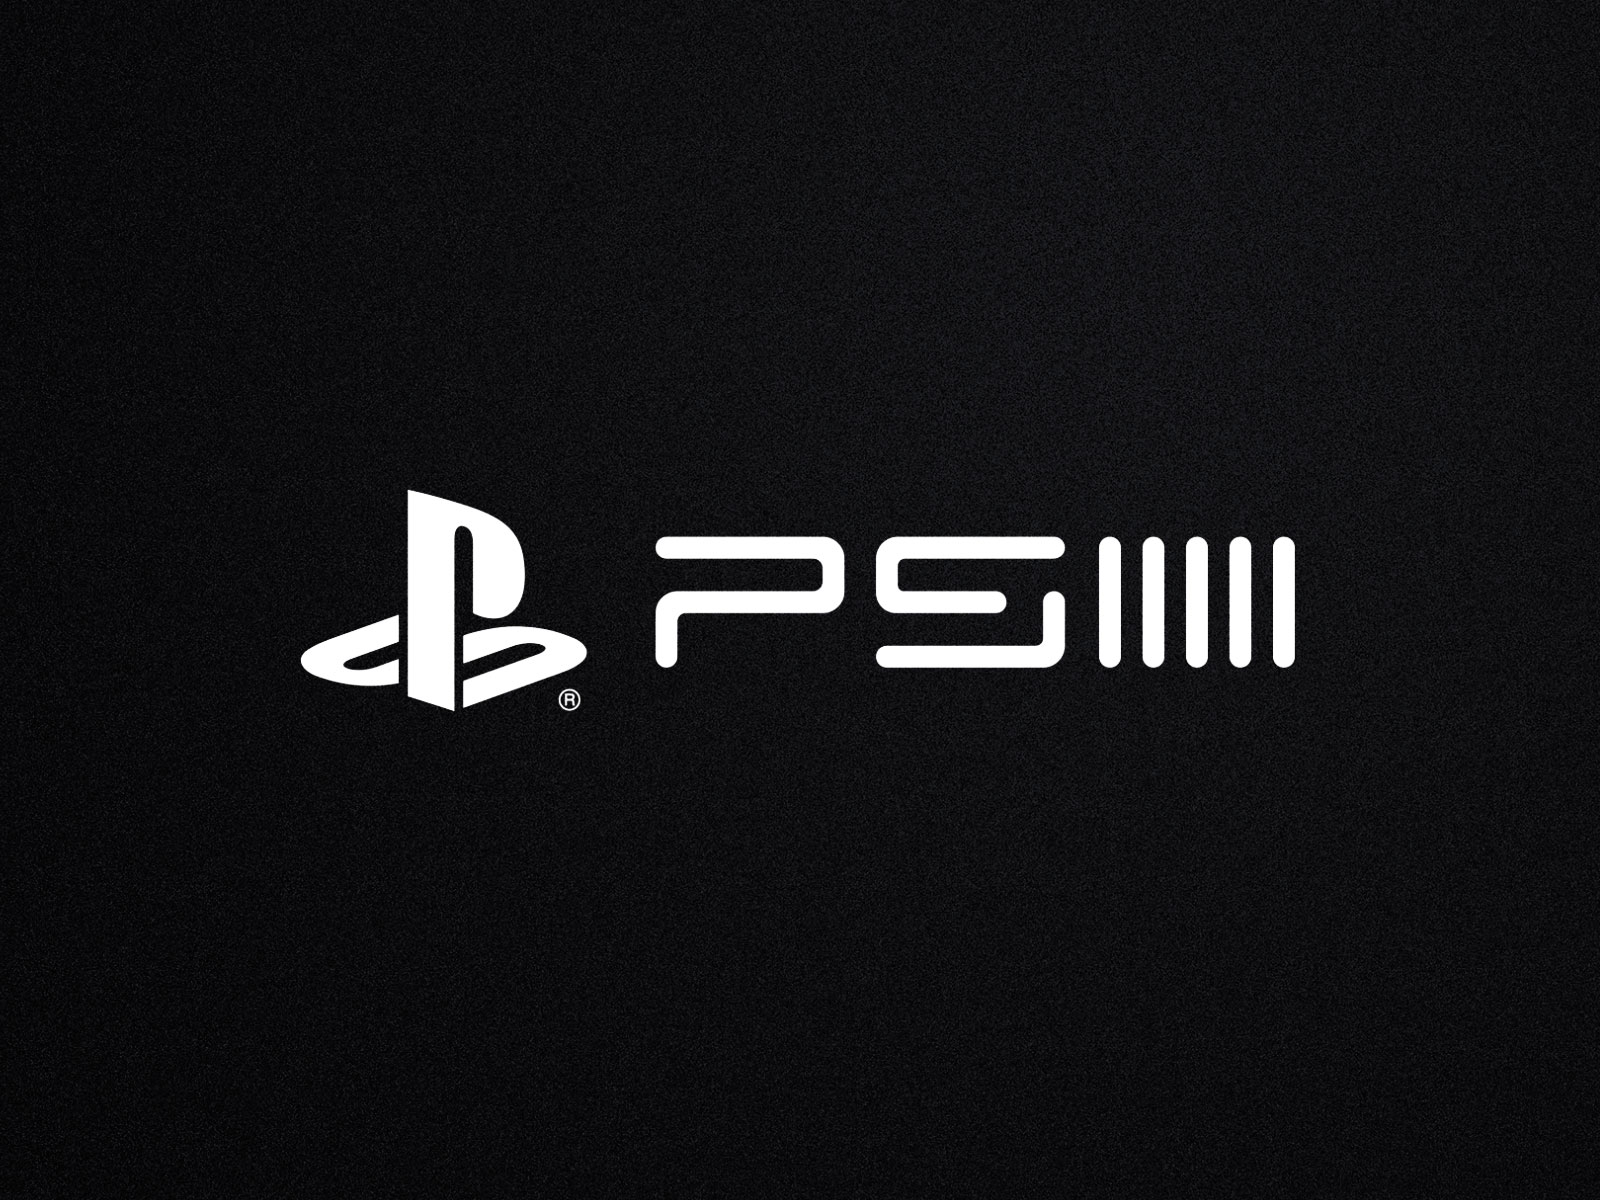 New Playstation 5 Logo Design by ERIC SANCHEZ on Dribbble